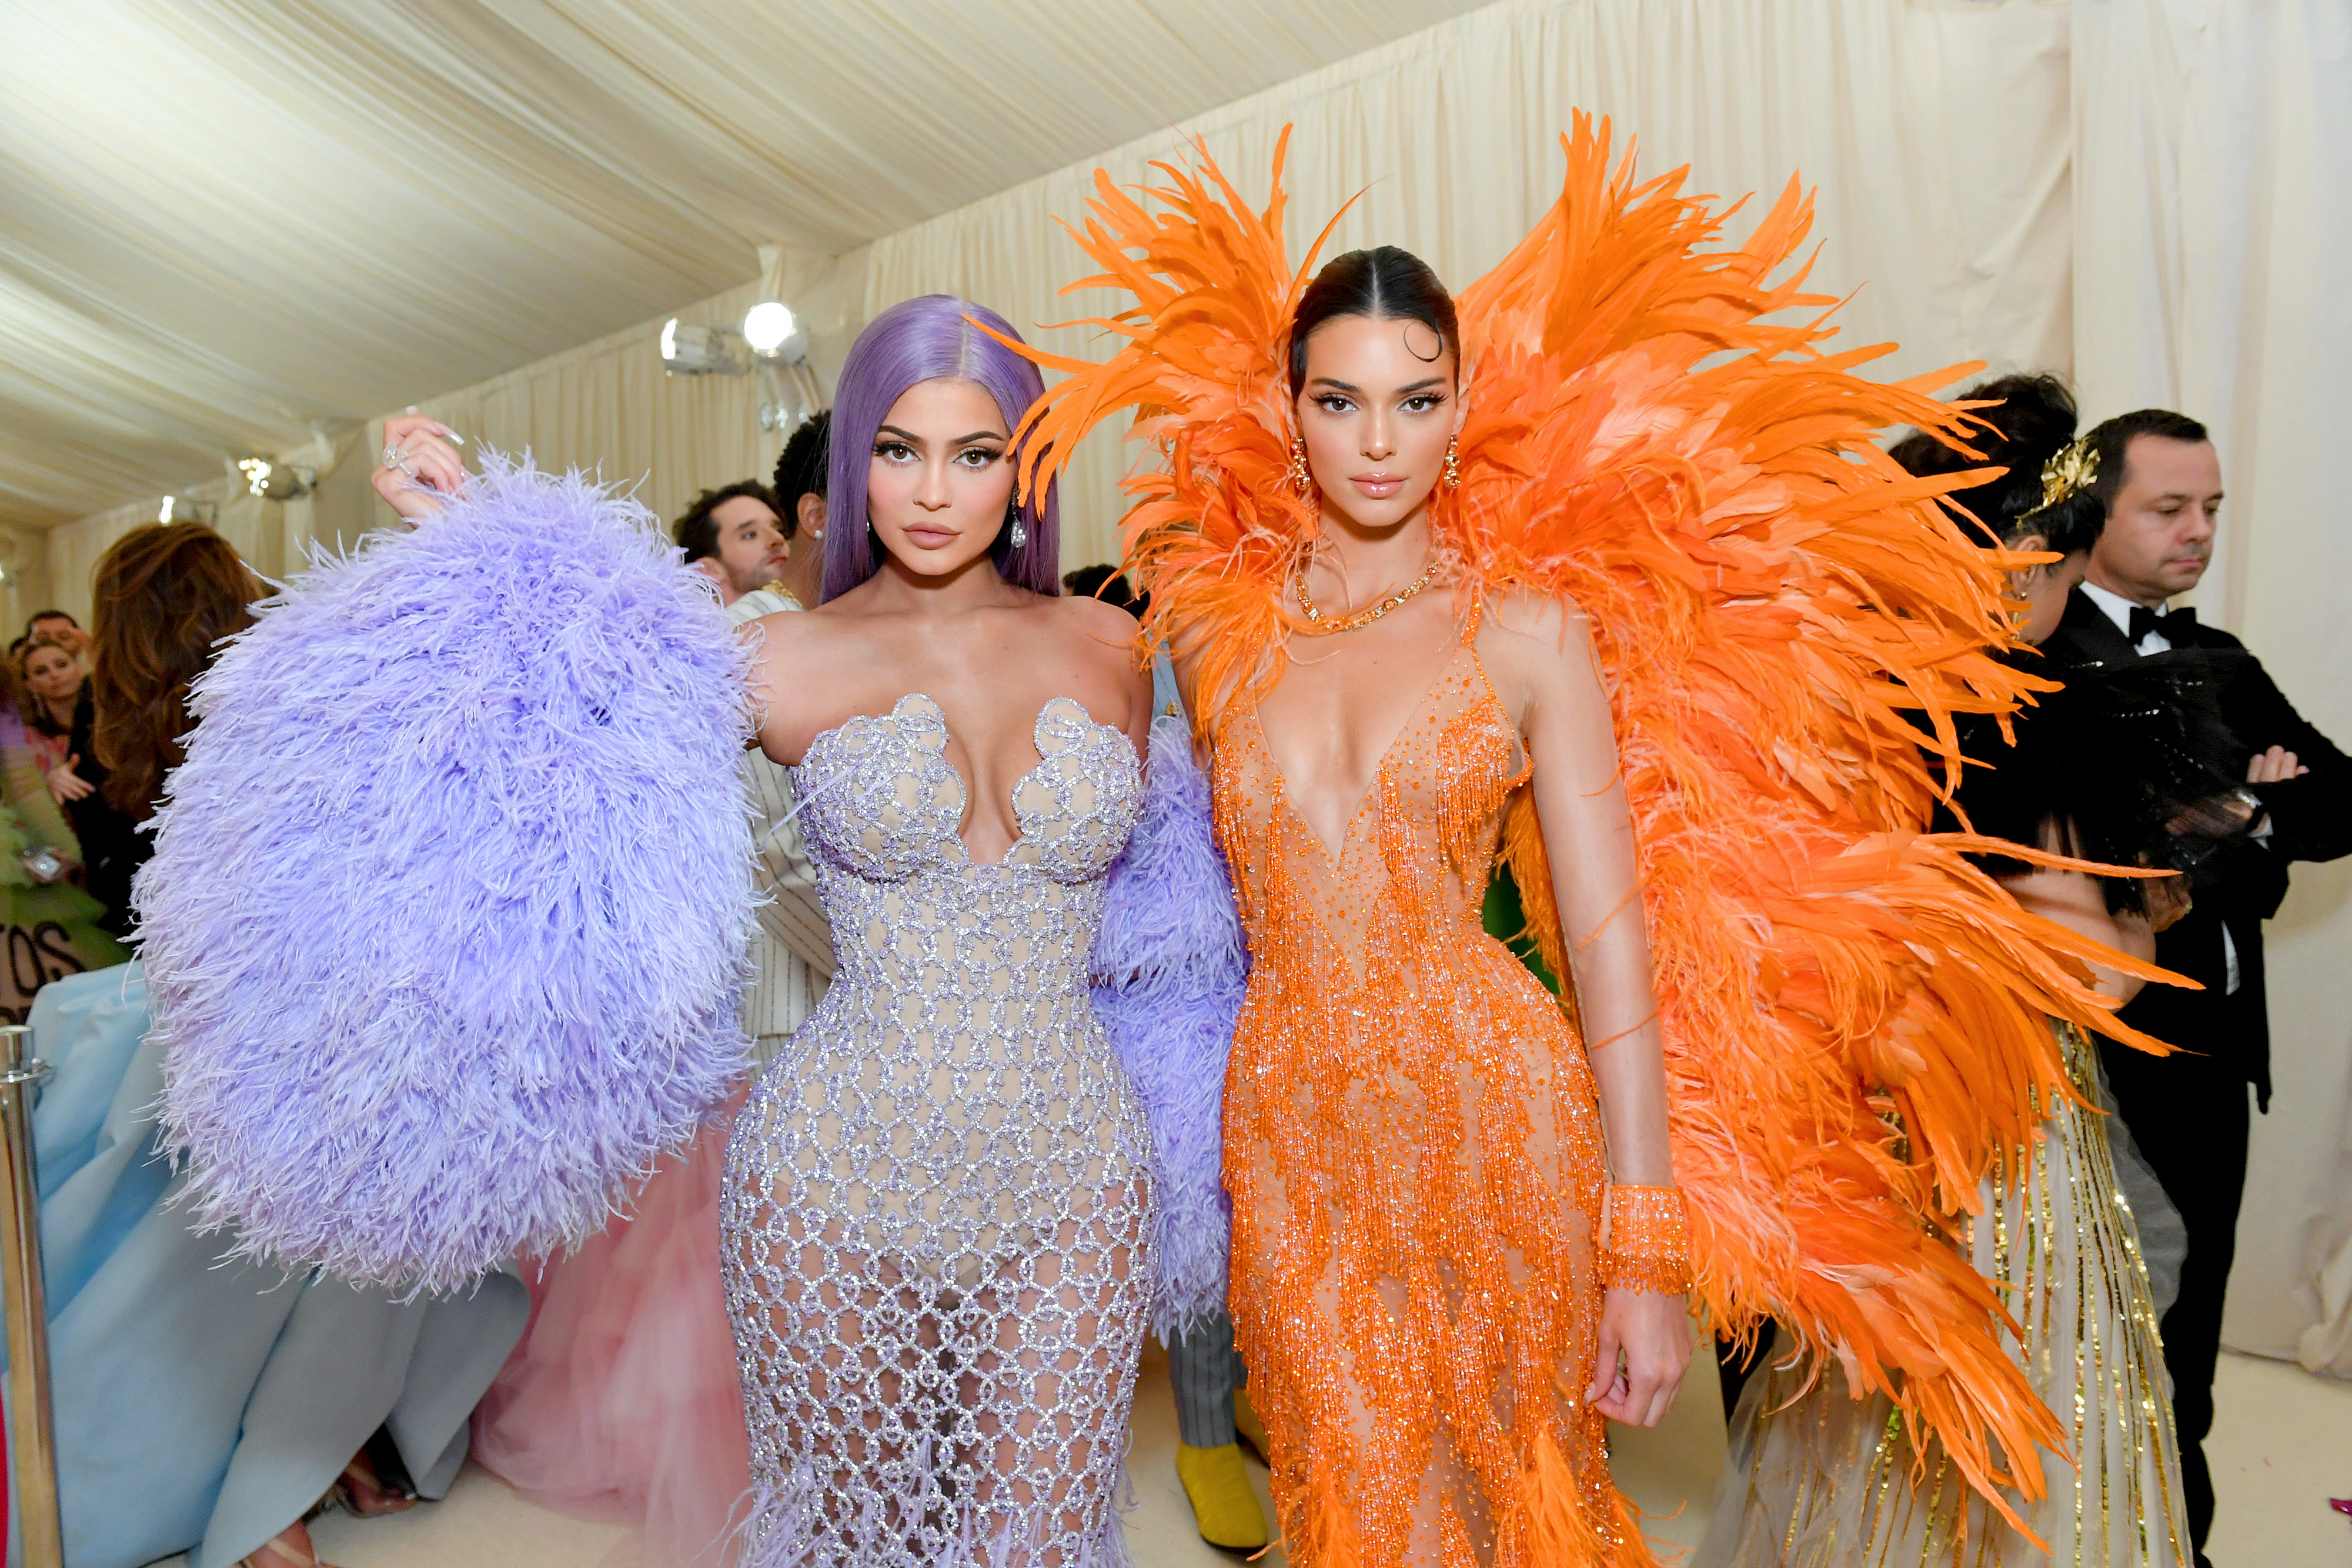 the two at the met gala wearing dresses with feathers